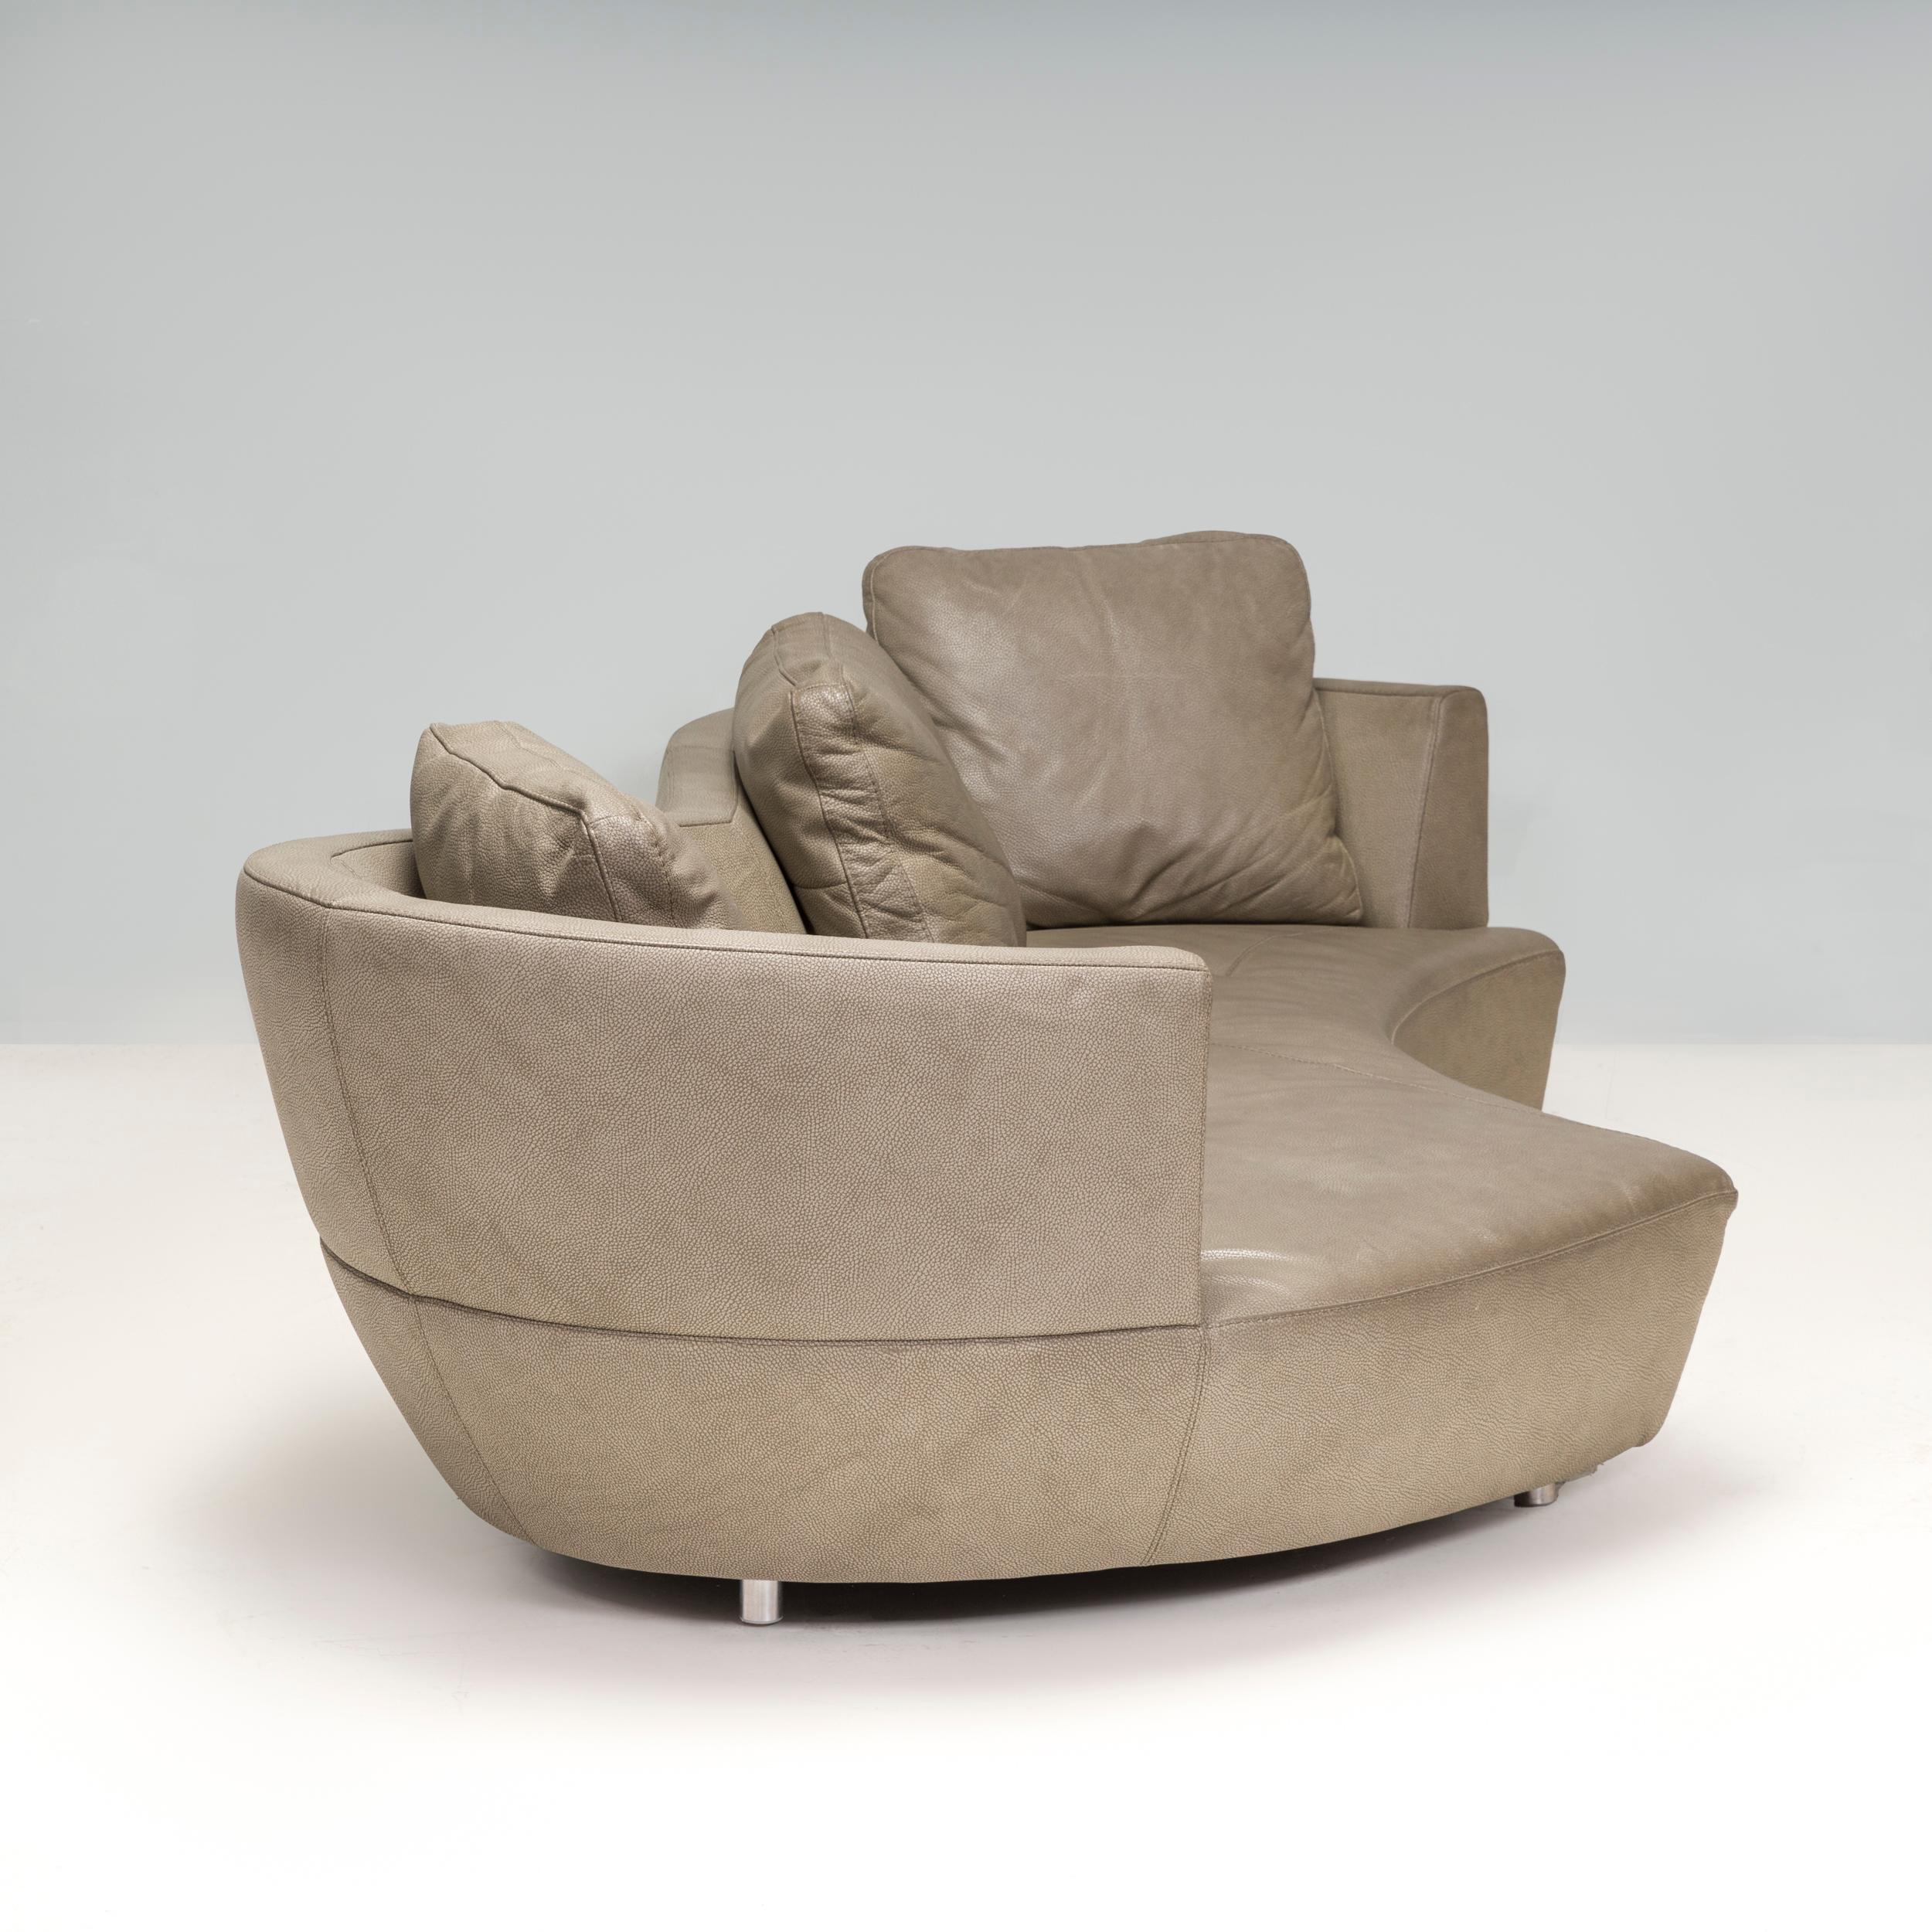 Roche Bobois by Gabriele Assmann & Alfred Kleene Leather Digital Curved Sofa In Good Condition For Sale In London, GB